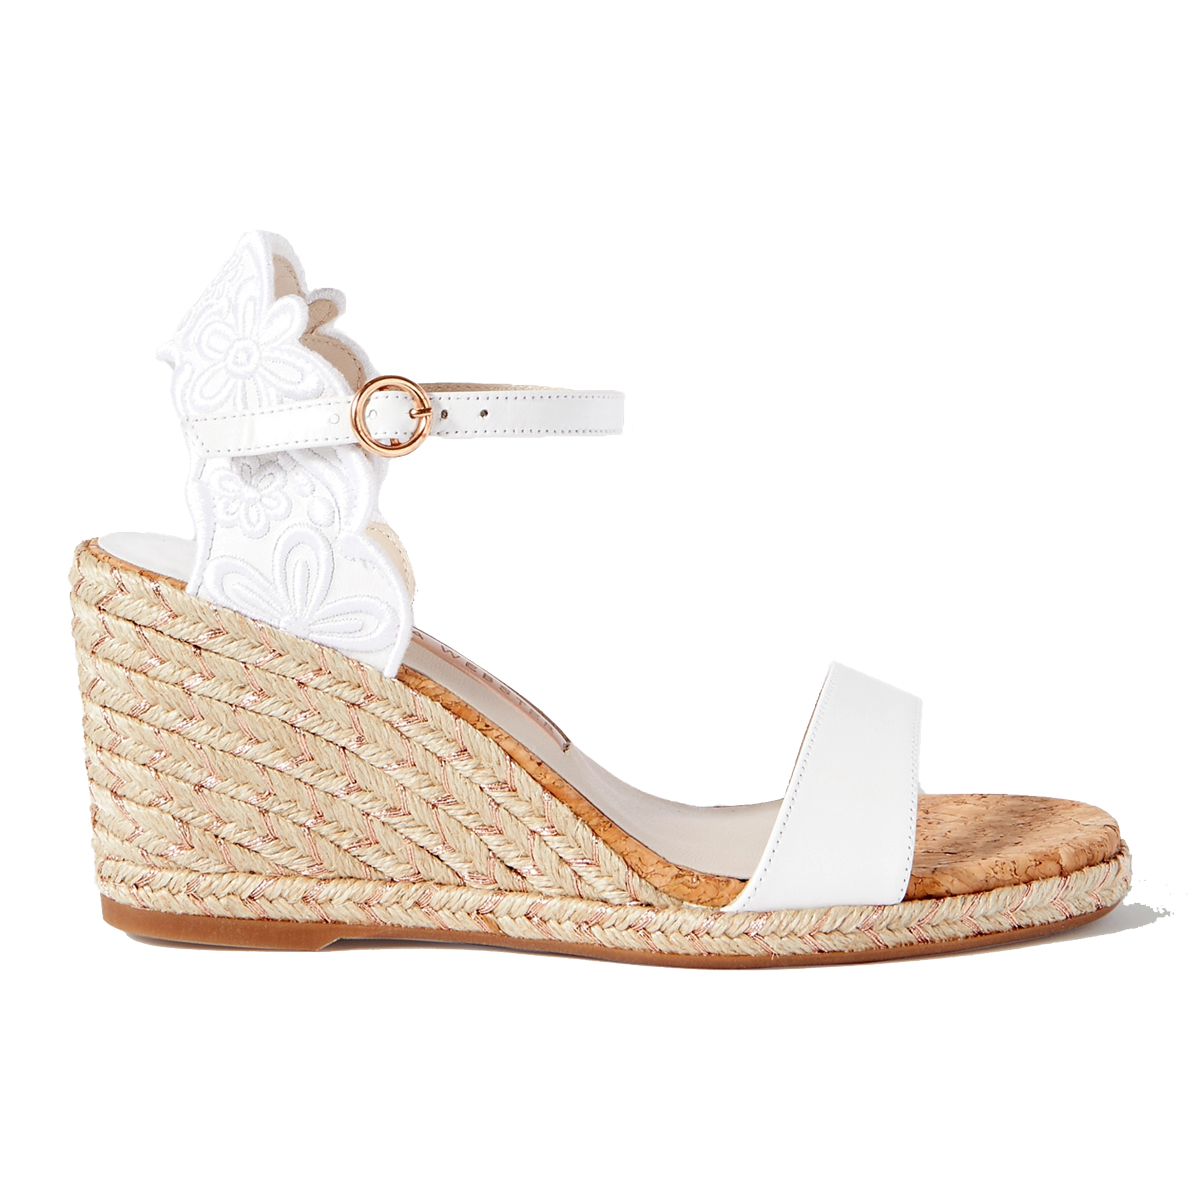 Classic Summer Espadrilles - A Well Styled Life®